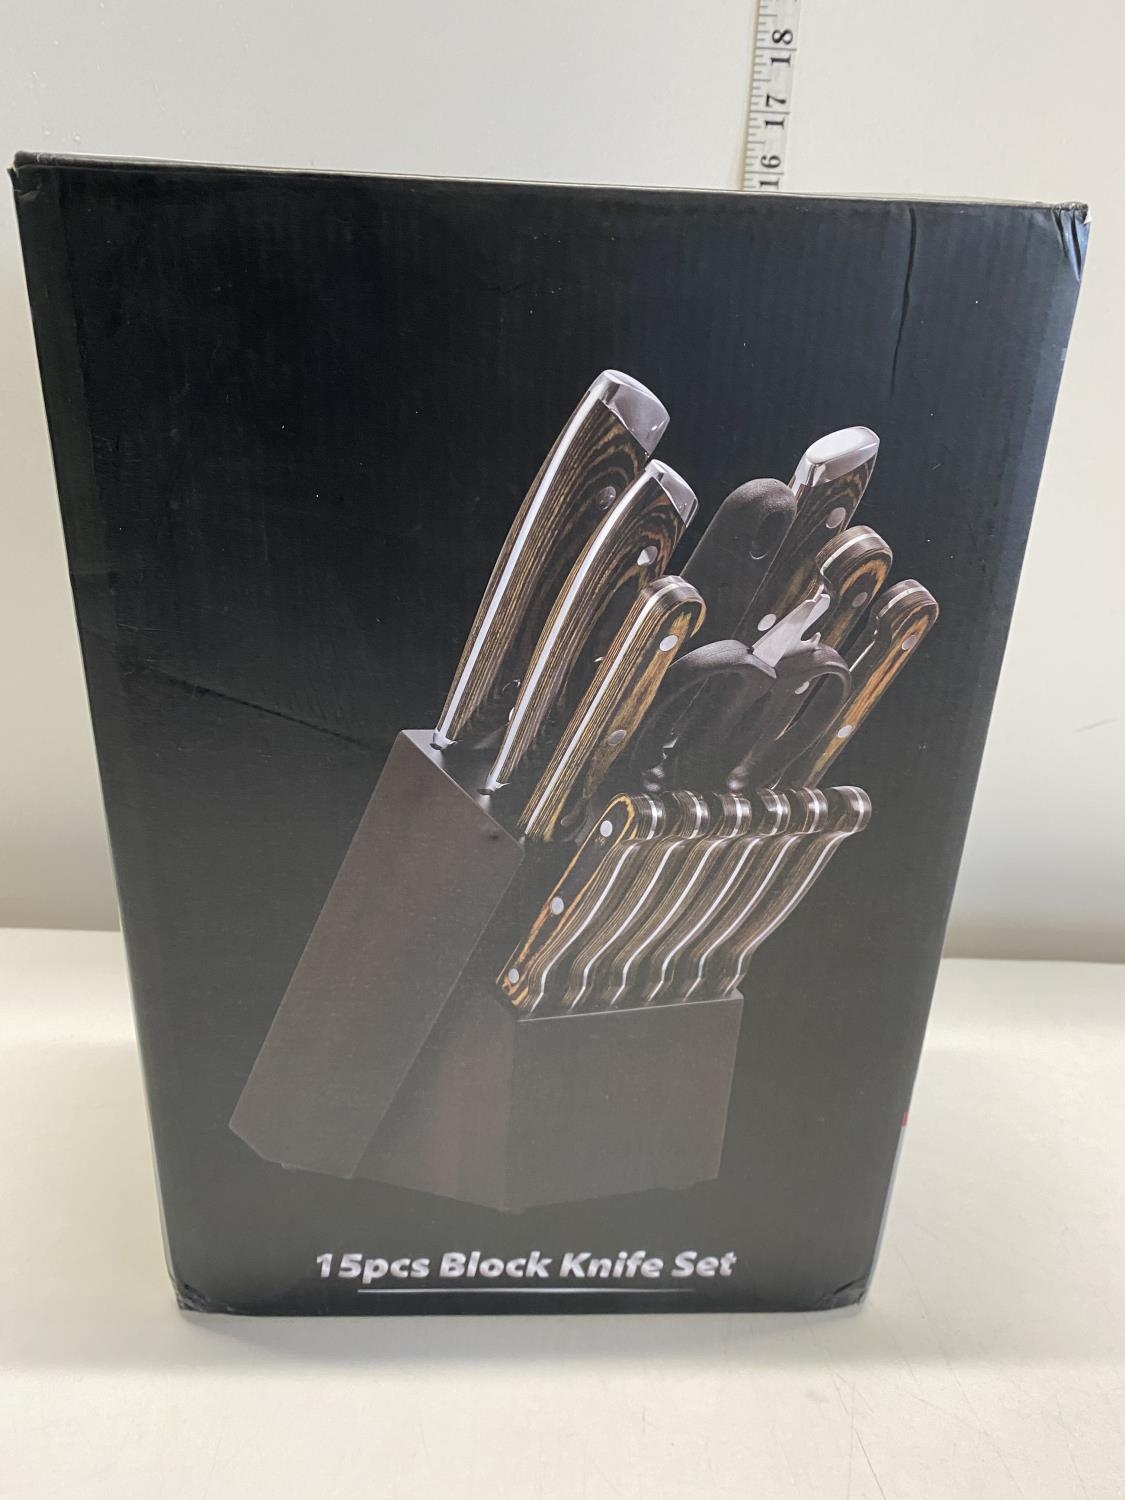 A 15 piece block knife set (unchecked), over 18's only